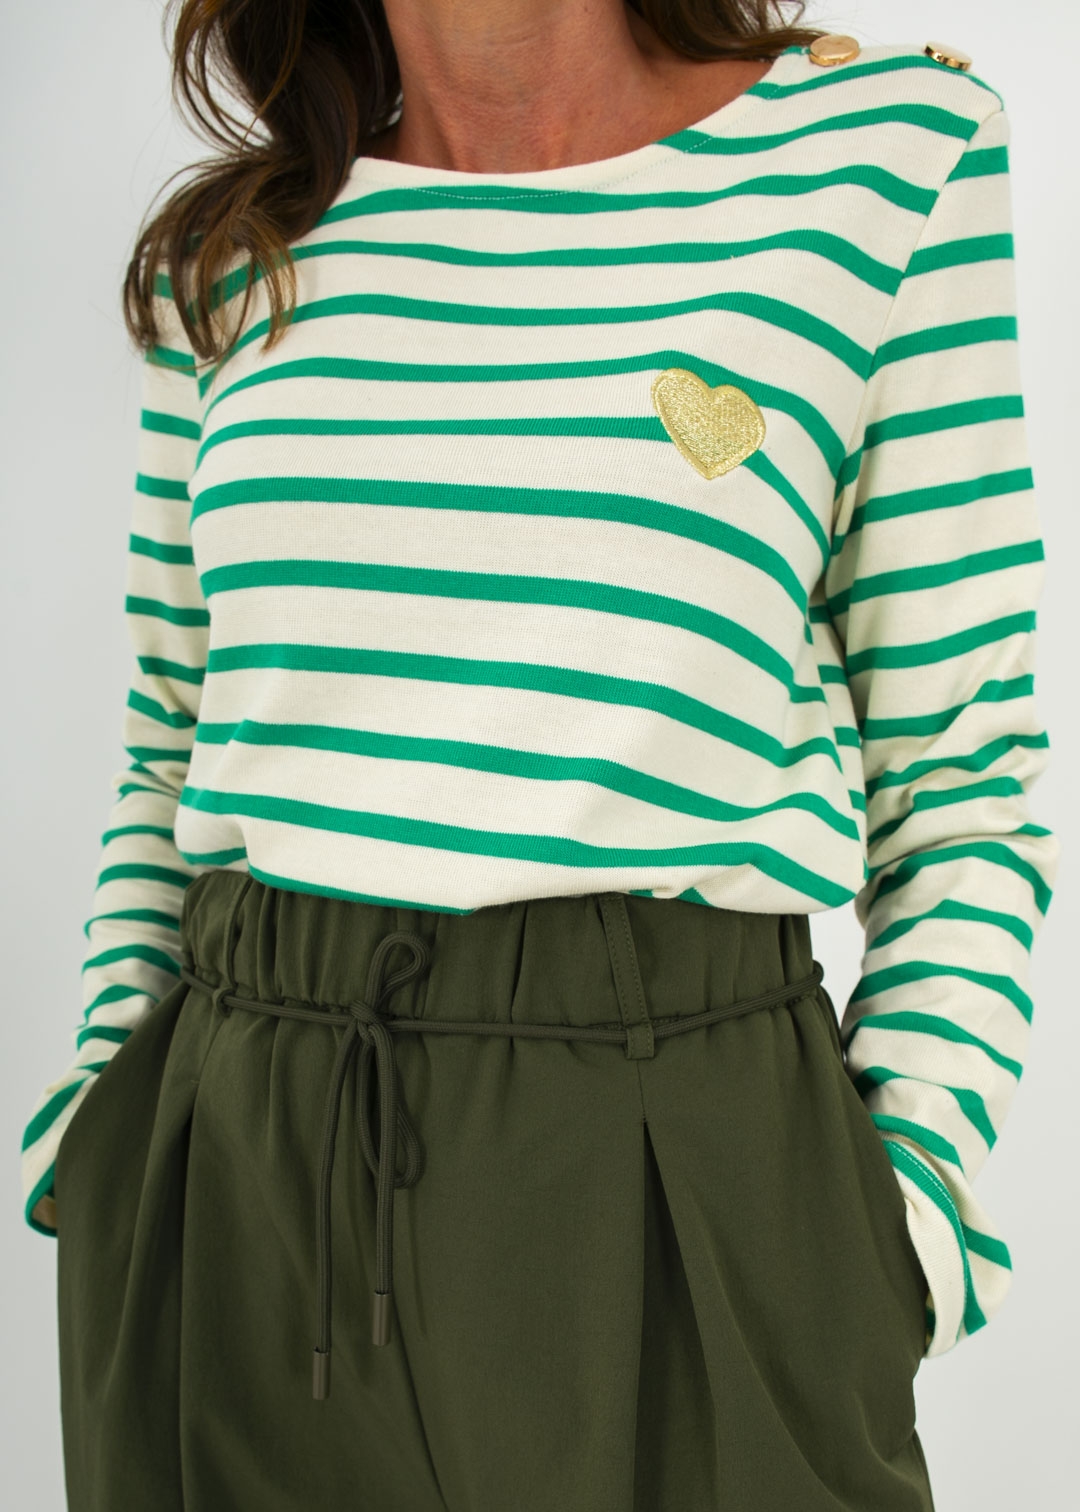 GREEN AND BEIGE STRIPED T-SHIRT